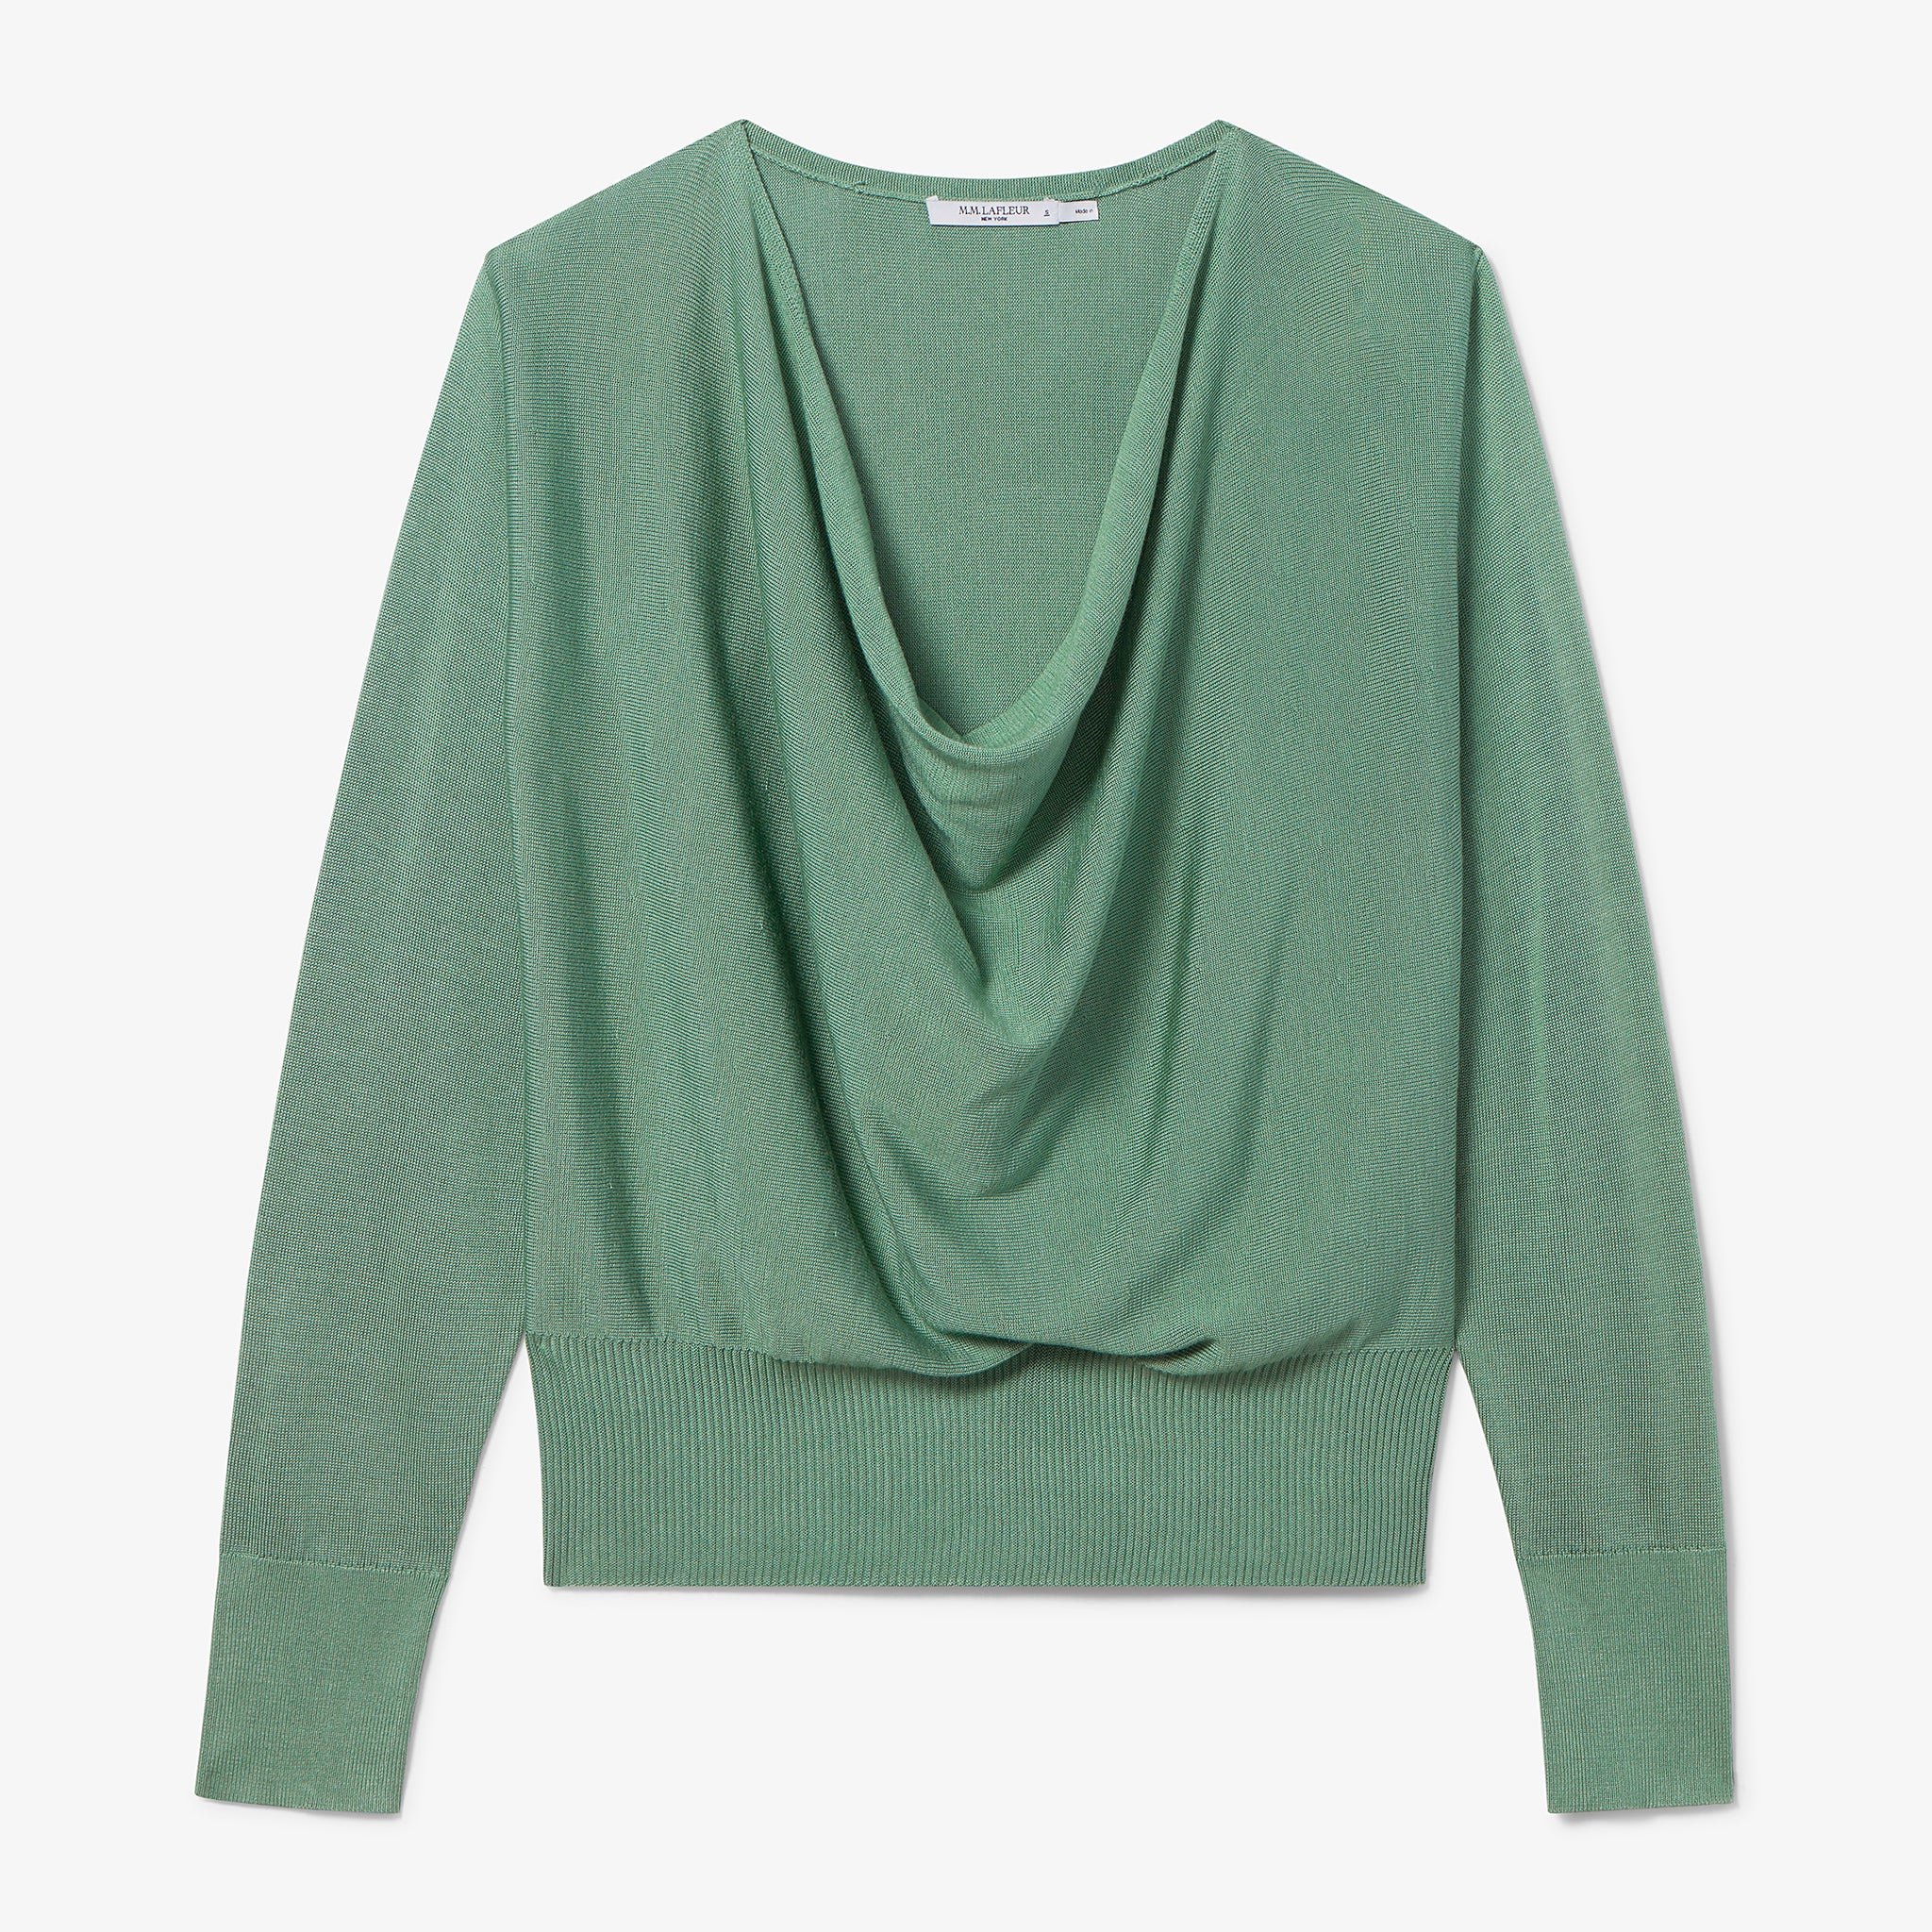 Packshot image of the monica top in spring green